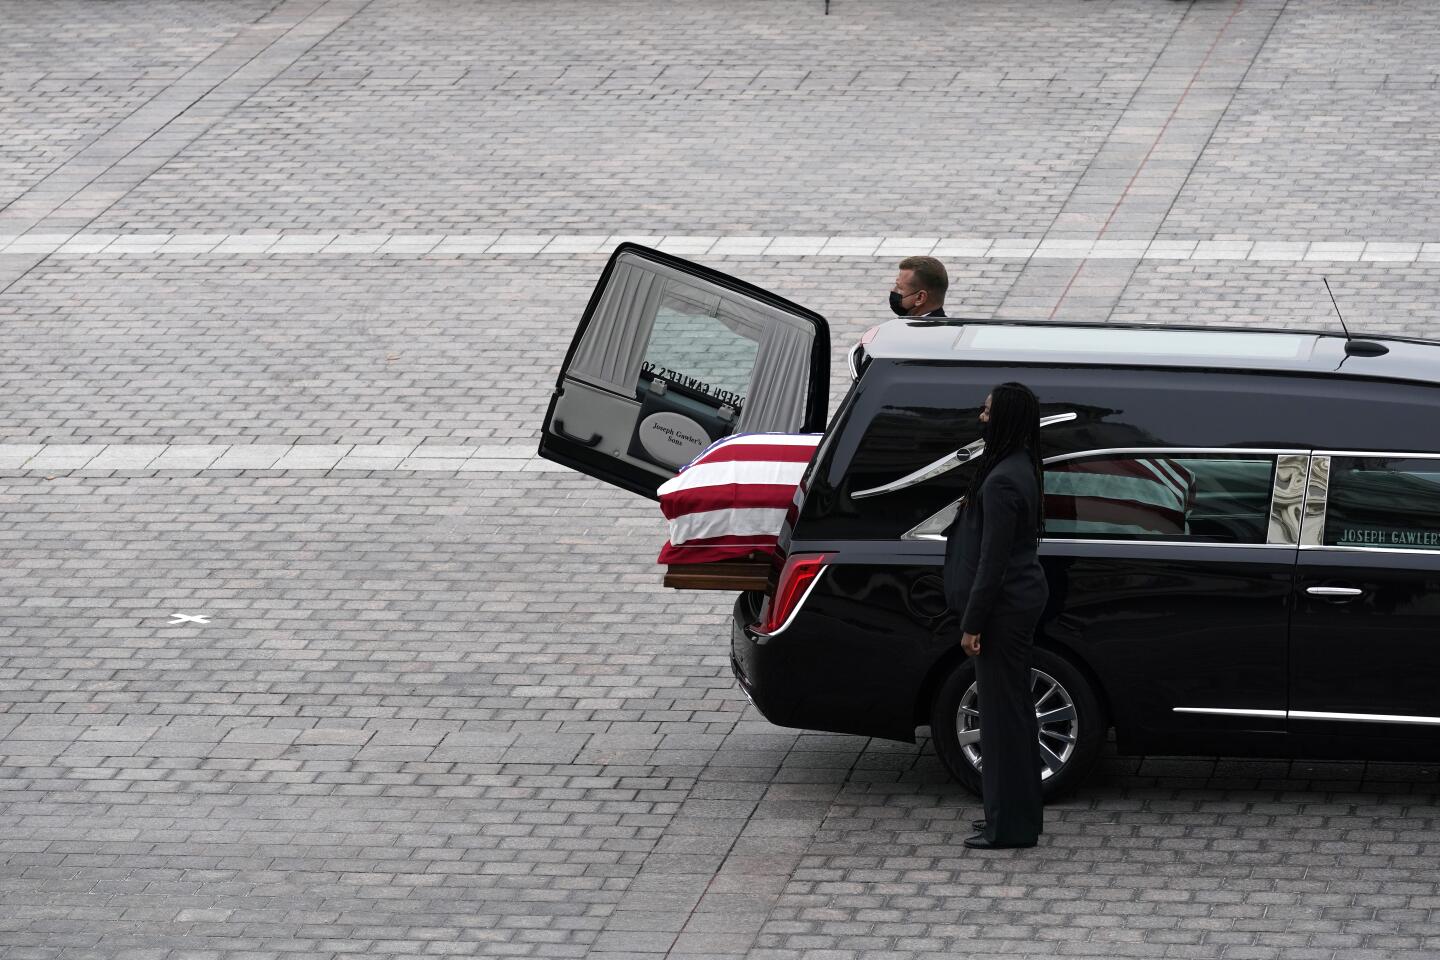 The casket of Justice Ruth Bader Ginsburg is prepared for transfer from the hearse that carried it to the U.S. Capitol